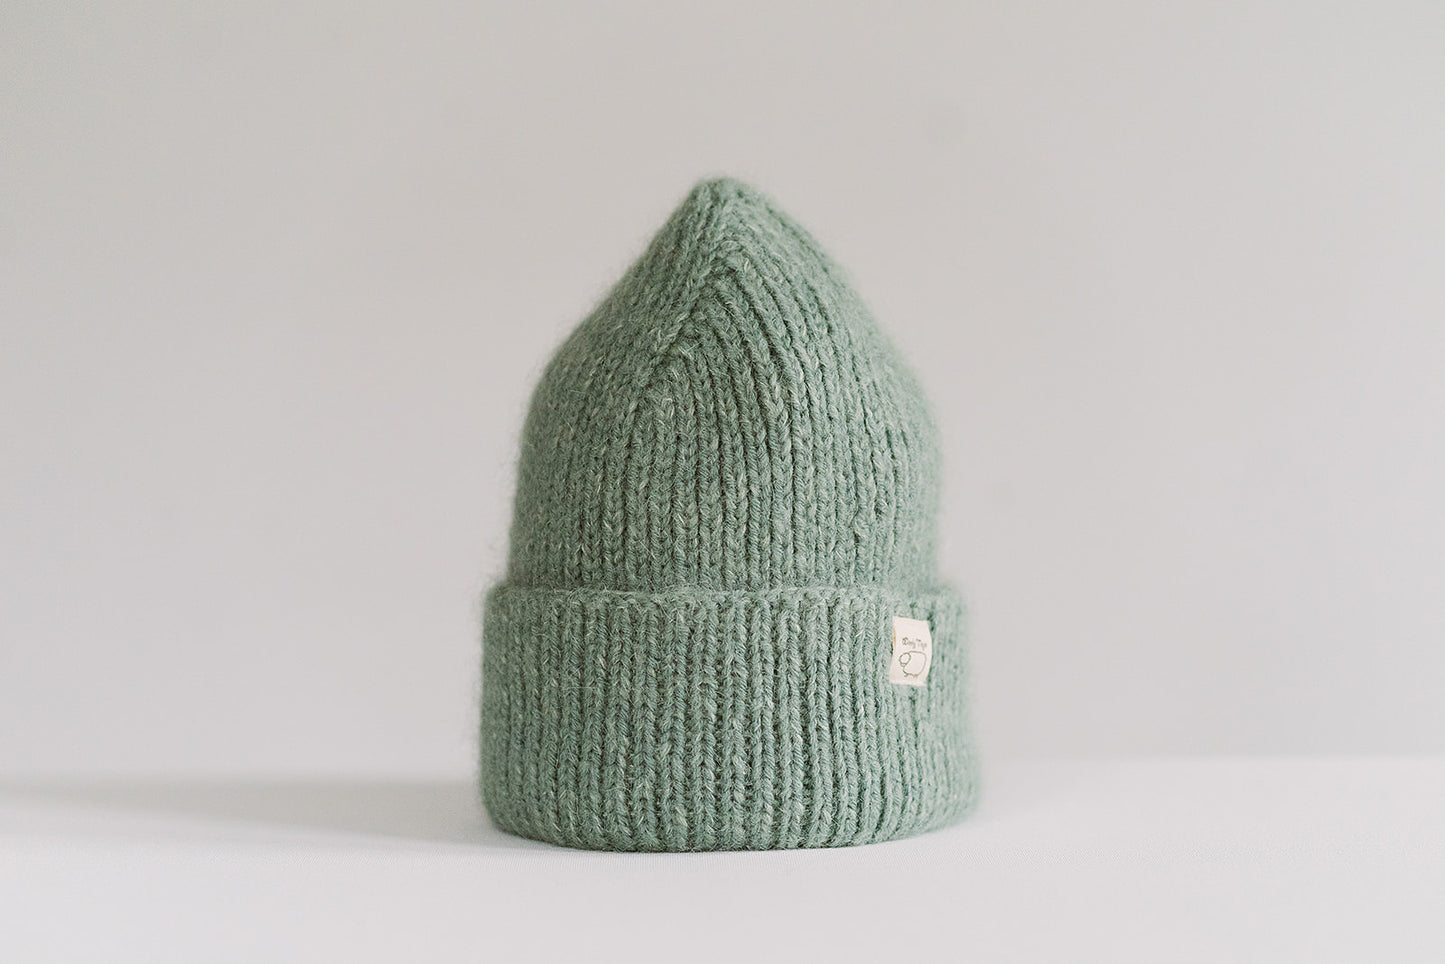 Hand-knitted Wooly Top hat in green.